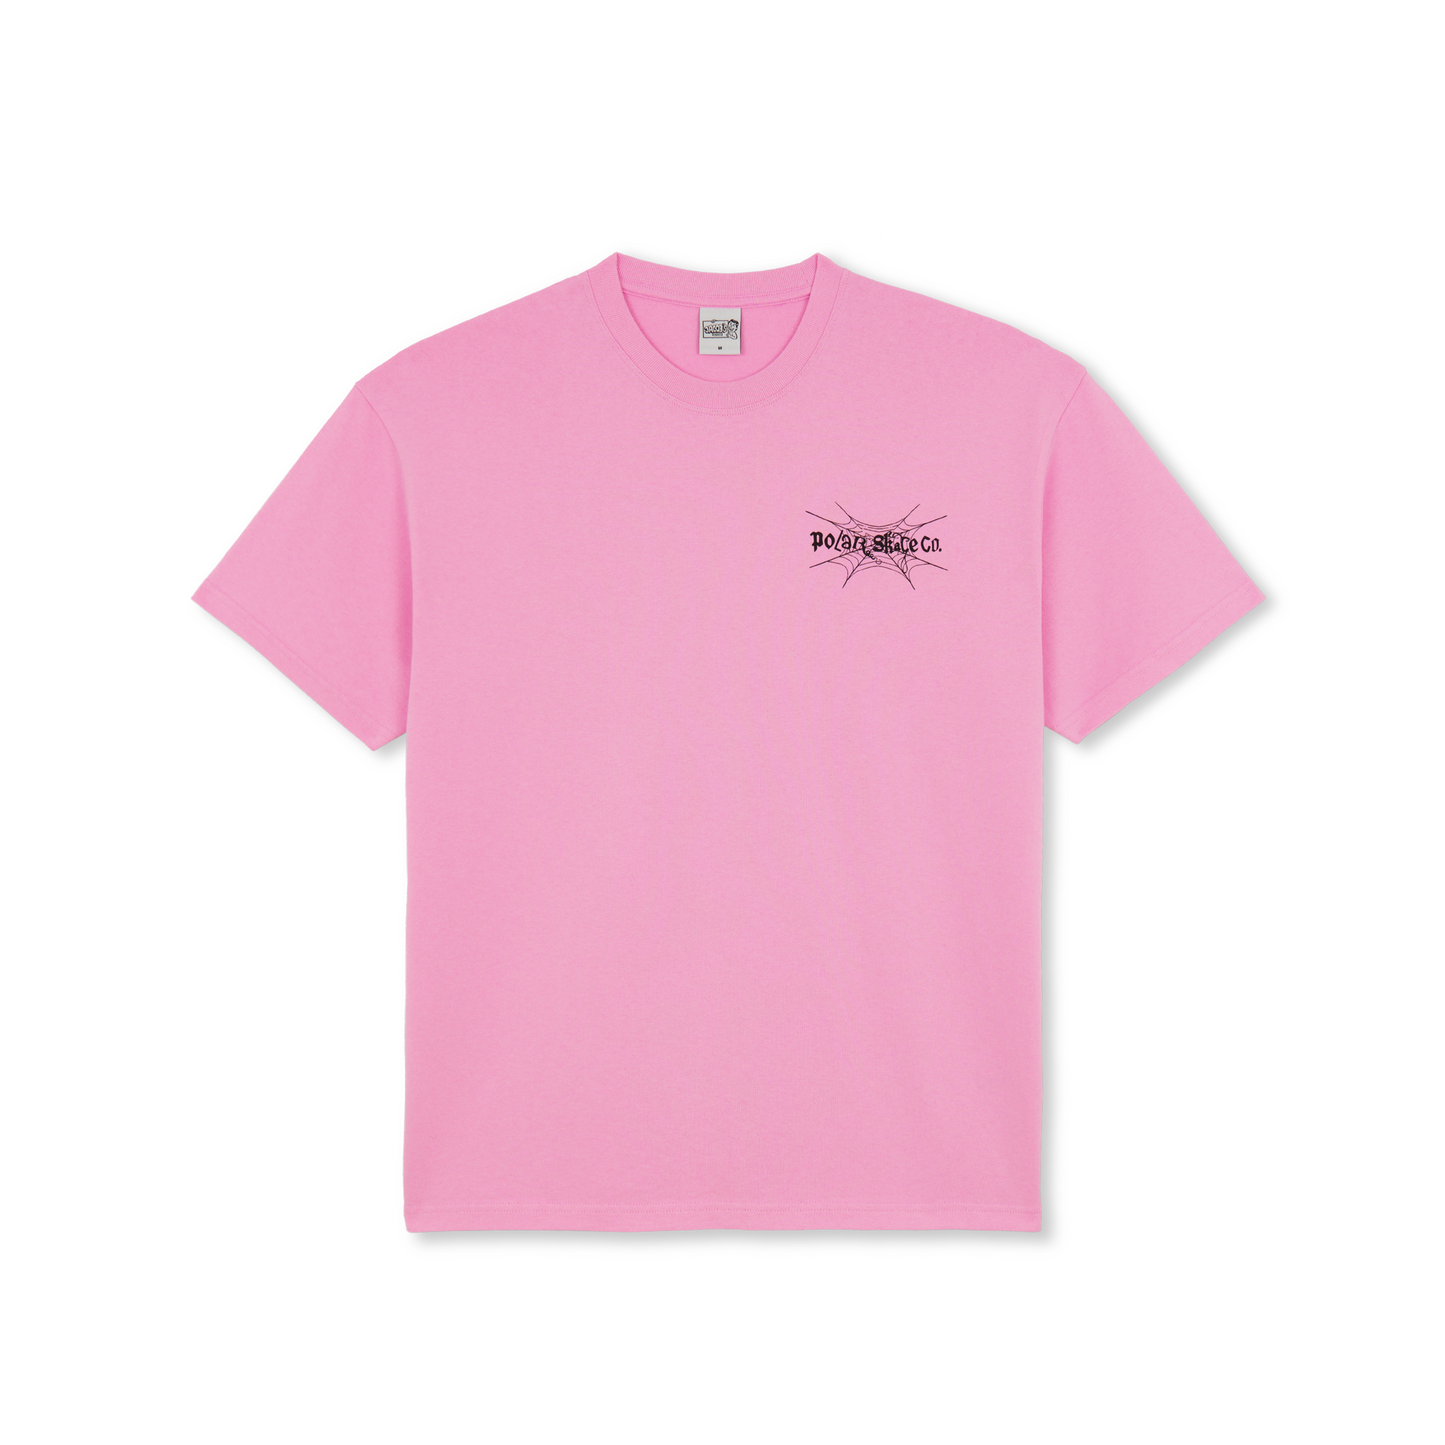 Spiderweb S/S Tee Shirt Pnk(size options listed)